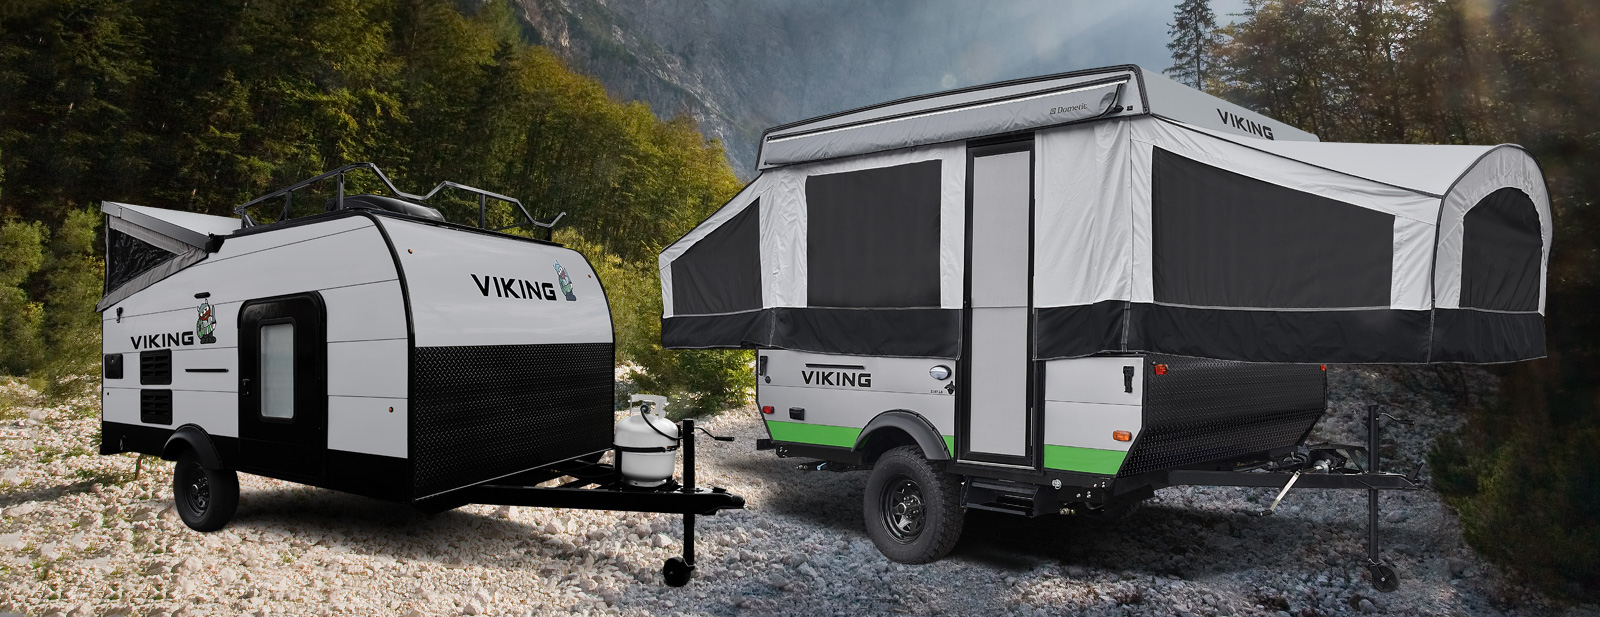 Viking Pop Up Campers By Coachmen Rv,How Much Do You Tip Movers 2020